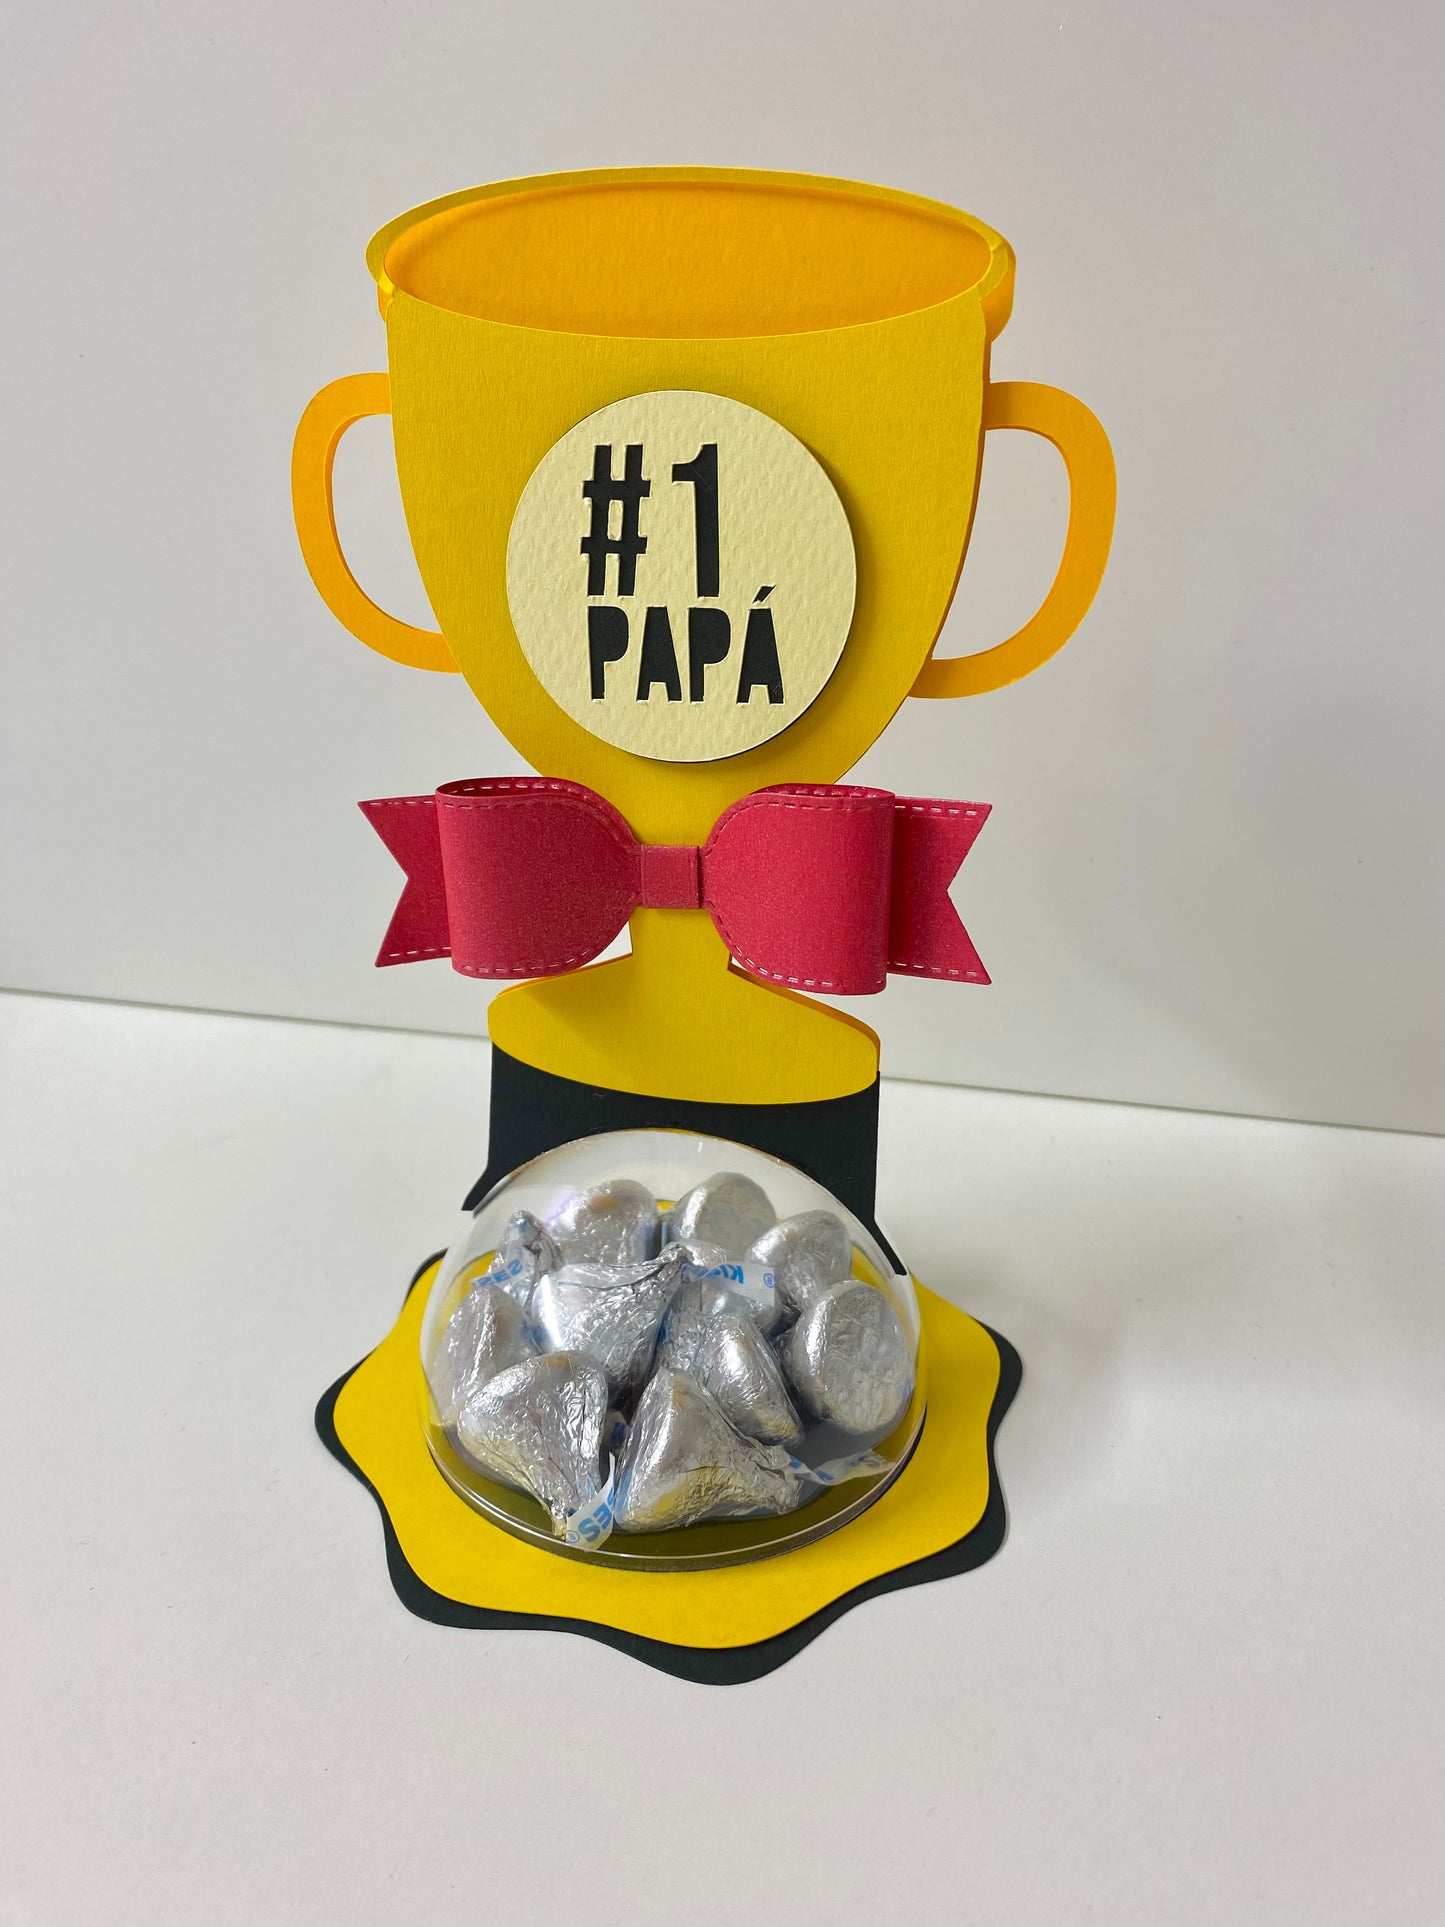 Dad trophy for candy